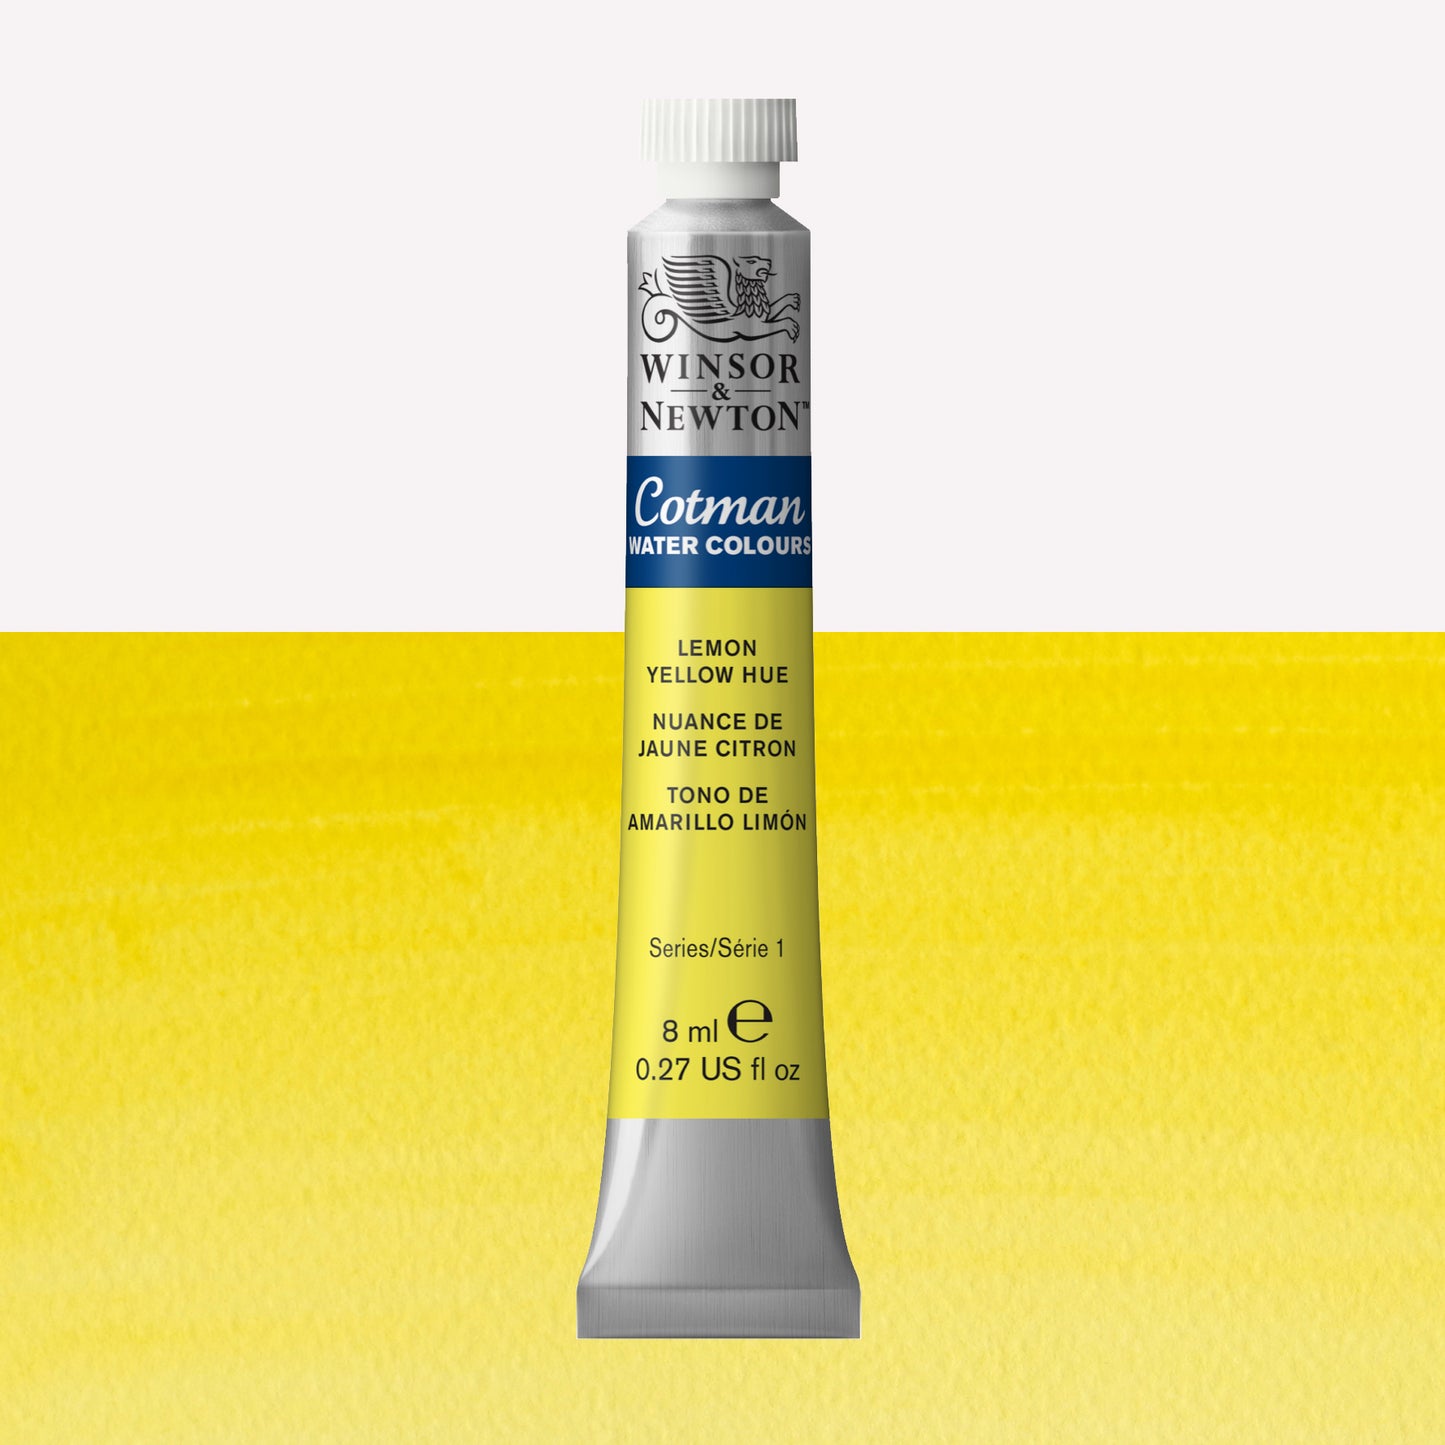 Winsor & Newton Cotman watercolour paint packaged in 8ml silver tubes with a white lid in the shade Lemon Yellow Hue, over a vibrant yellow colour swatch.